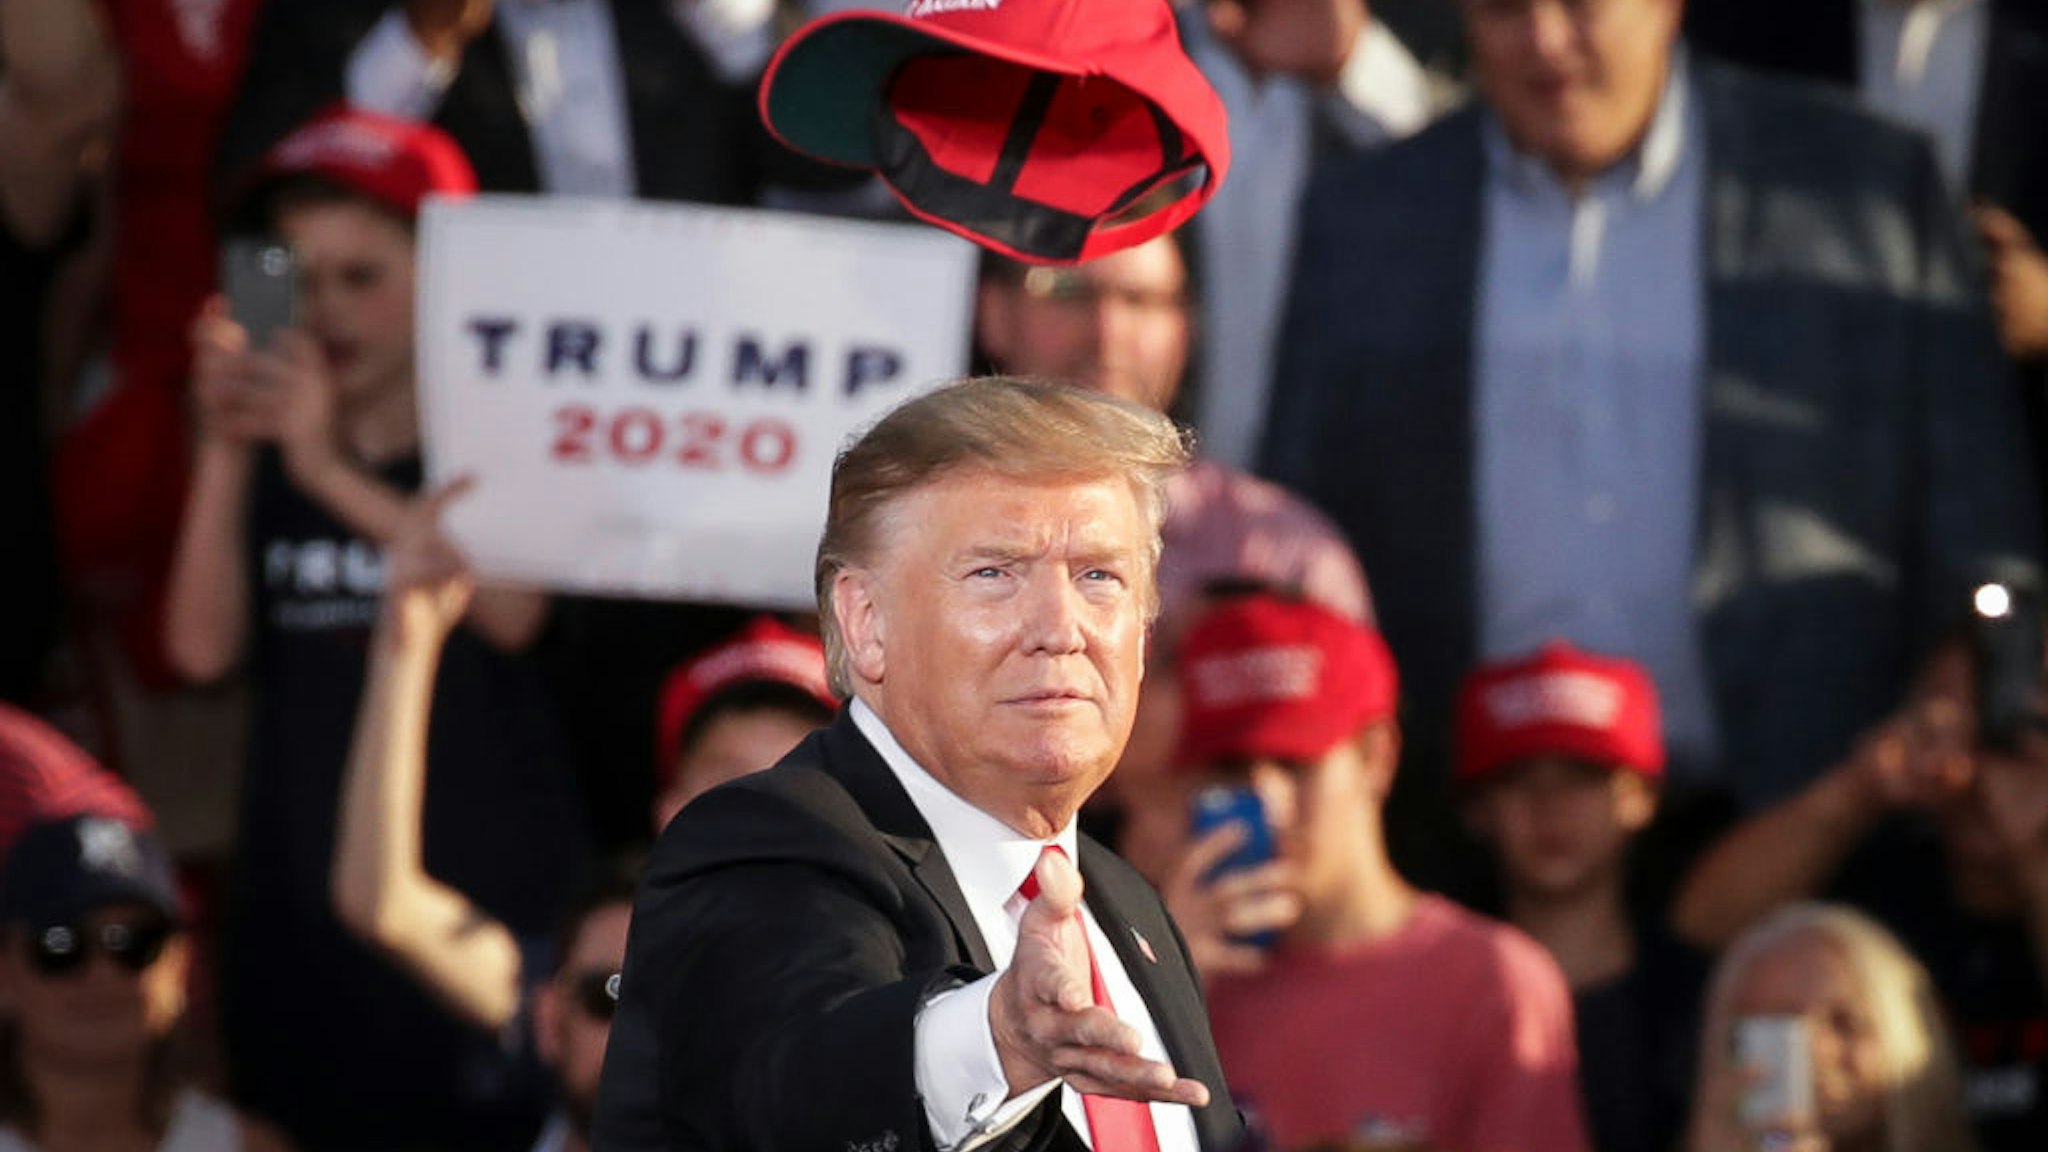 President Donald Trump tosses a hat into the crowd as he arrives for a 'Make America Great Again' campaign rally at Williamsport Regional Airport, May 20, 2019 in Montoursville, Pennsylvania.